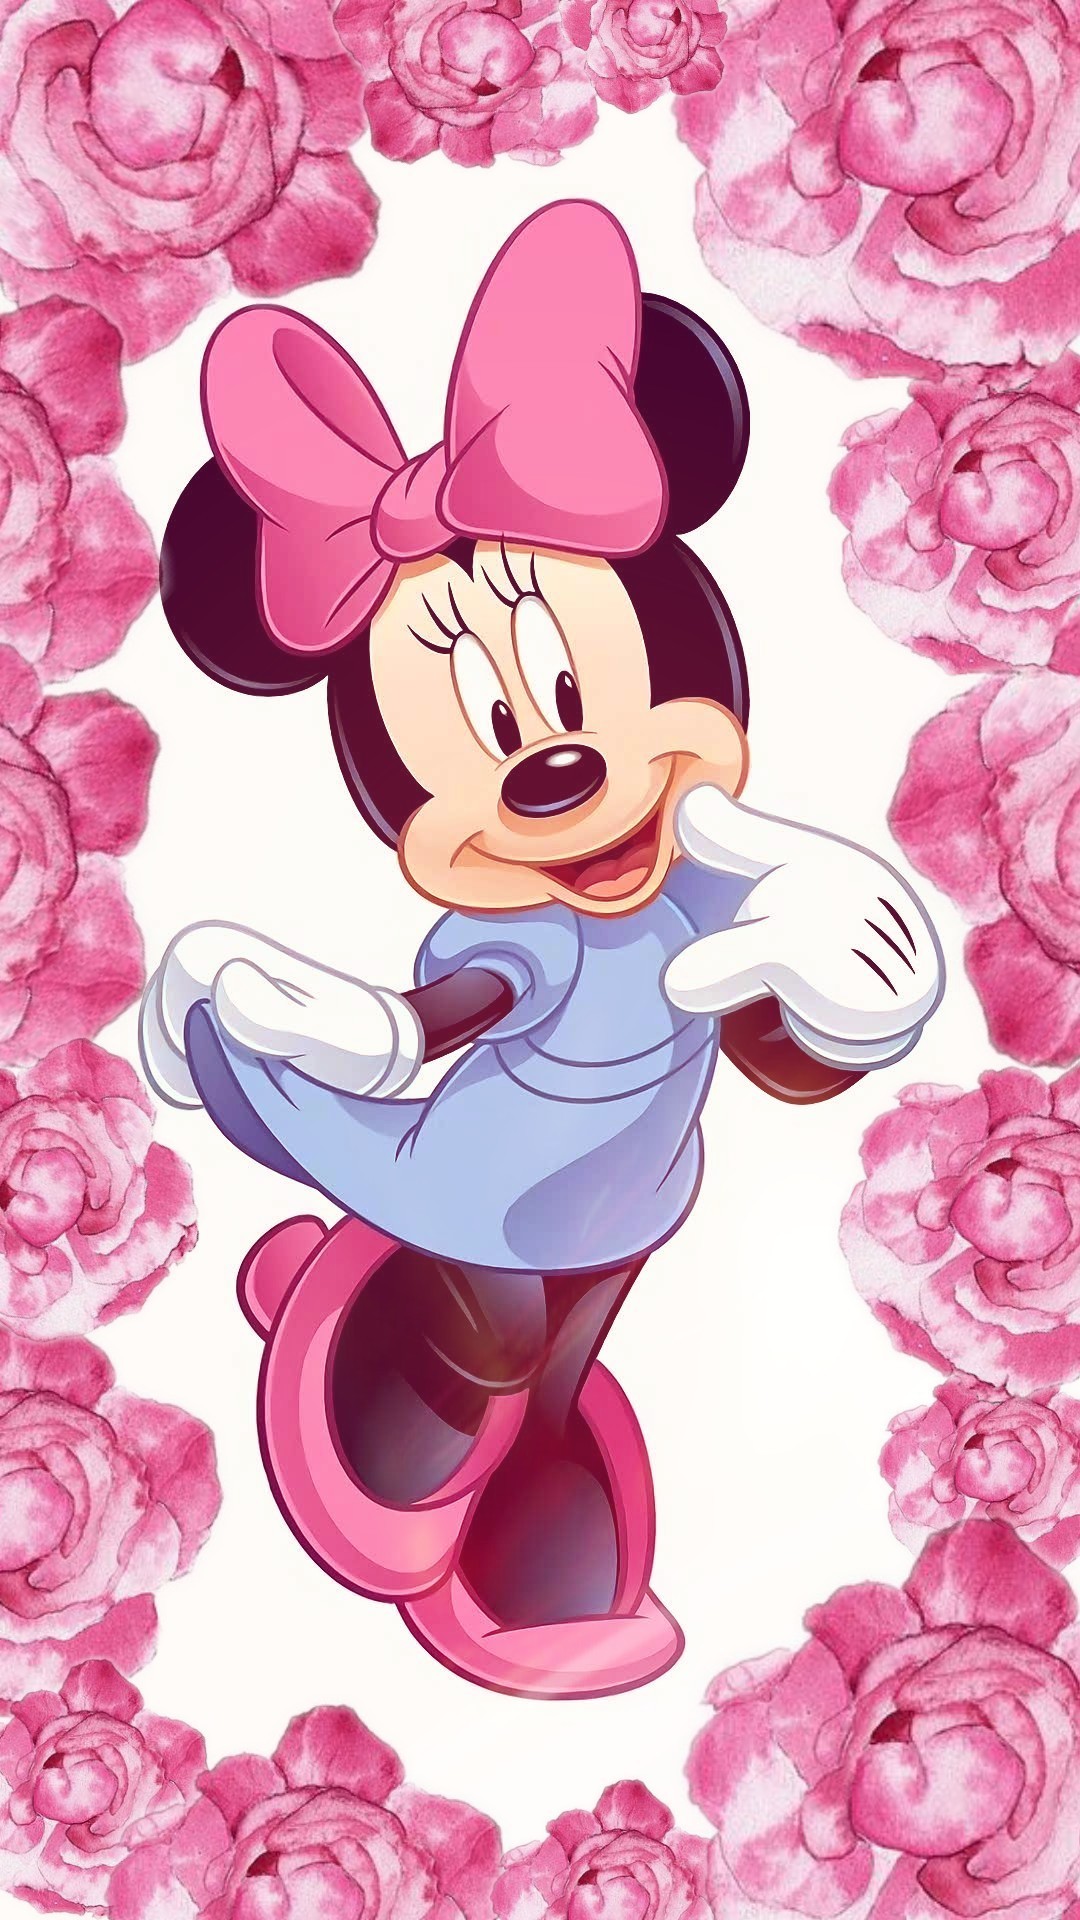 pink boop betty minnie mouse rose mickey parede papel disney polka dot rosa christmas wallpapers papeis fofo da para birthday